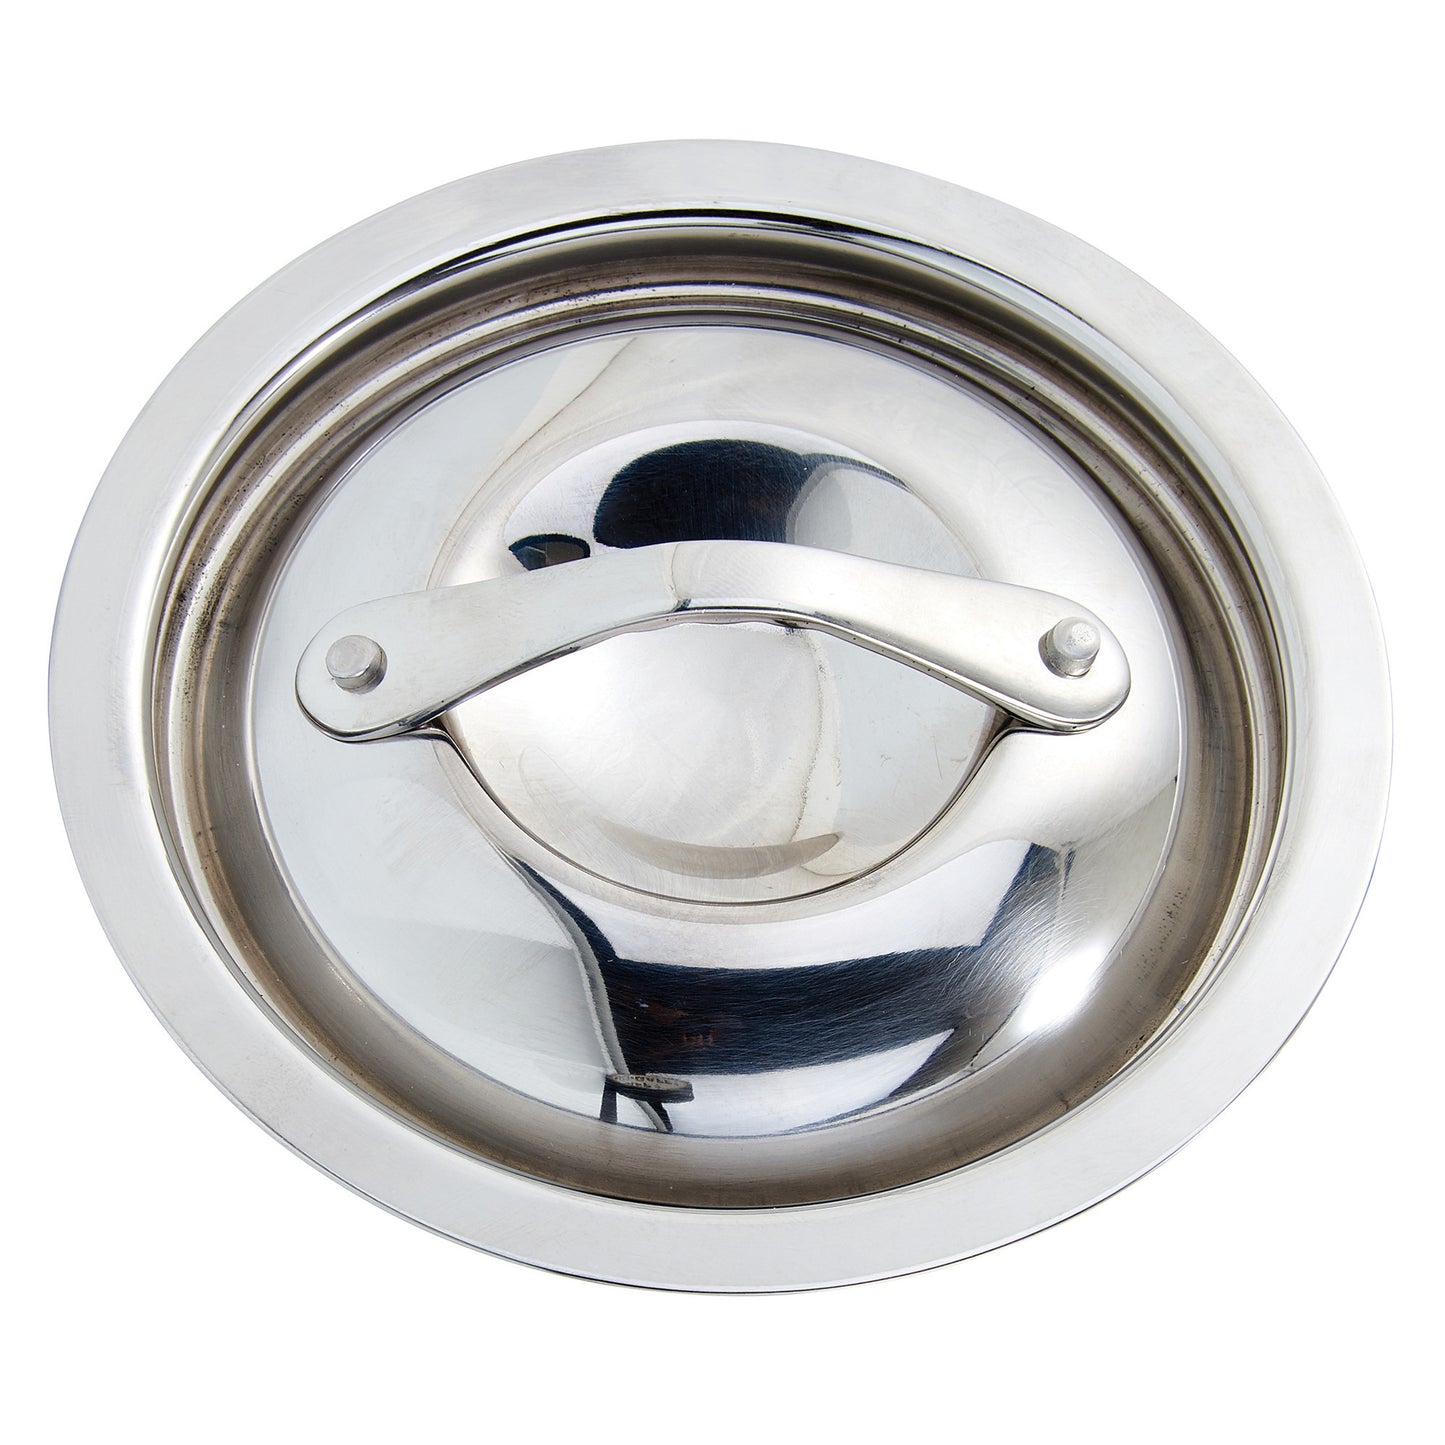 DCL-375 - Lid for 3.75" casserole